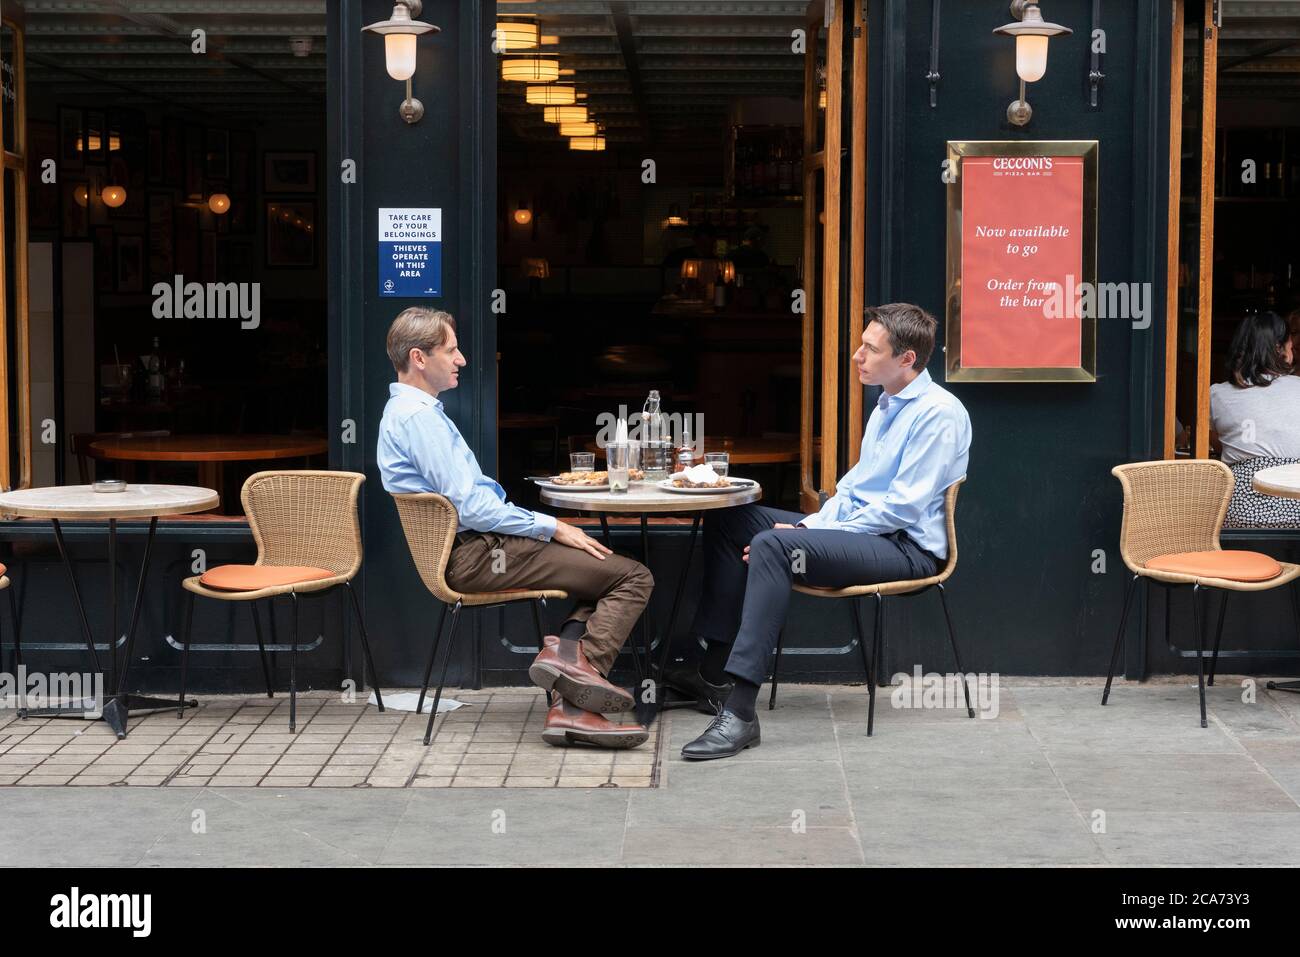 Diners eat food at outdoor restaurant tables in Soho during the Eat Out to Help Out scheme offering diners a discount off meals to help boost restaurants and pubs post-lockdown. Stock Photo